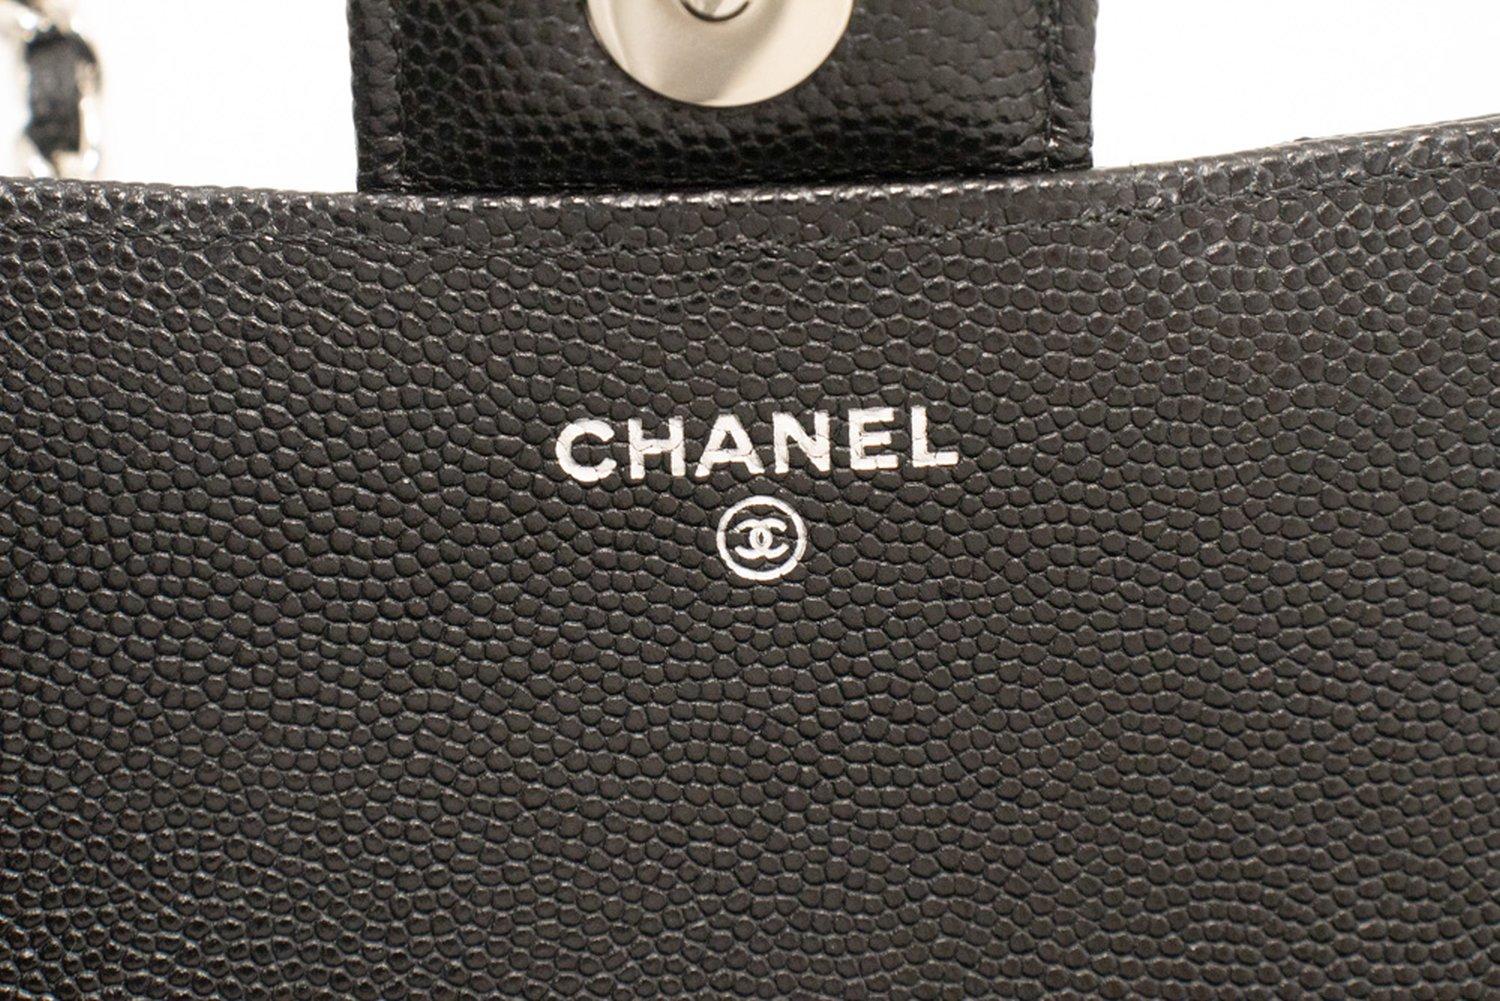 CHANEL Flap Phone Holder With Chain Bag Black Crossbody Clutch For Sale 11